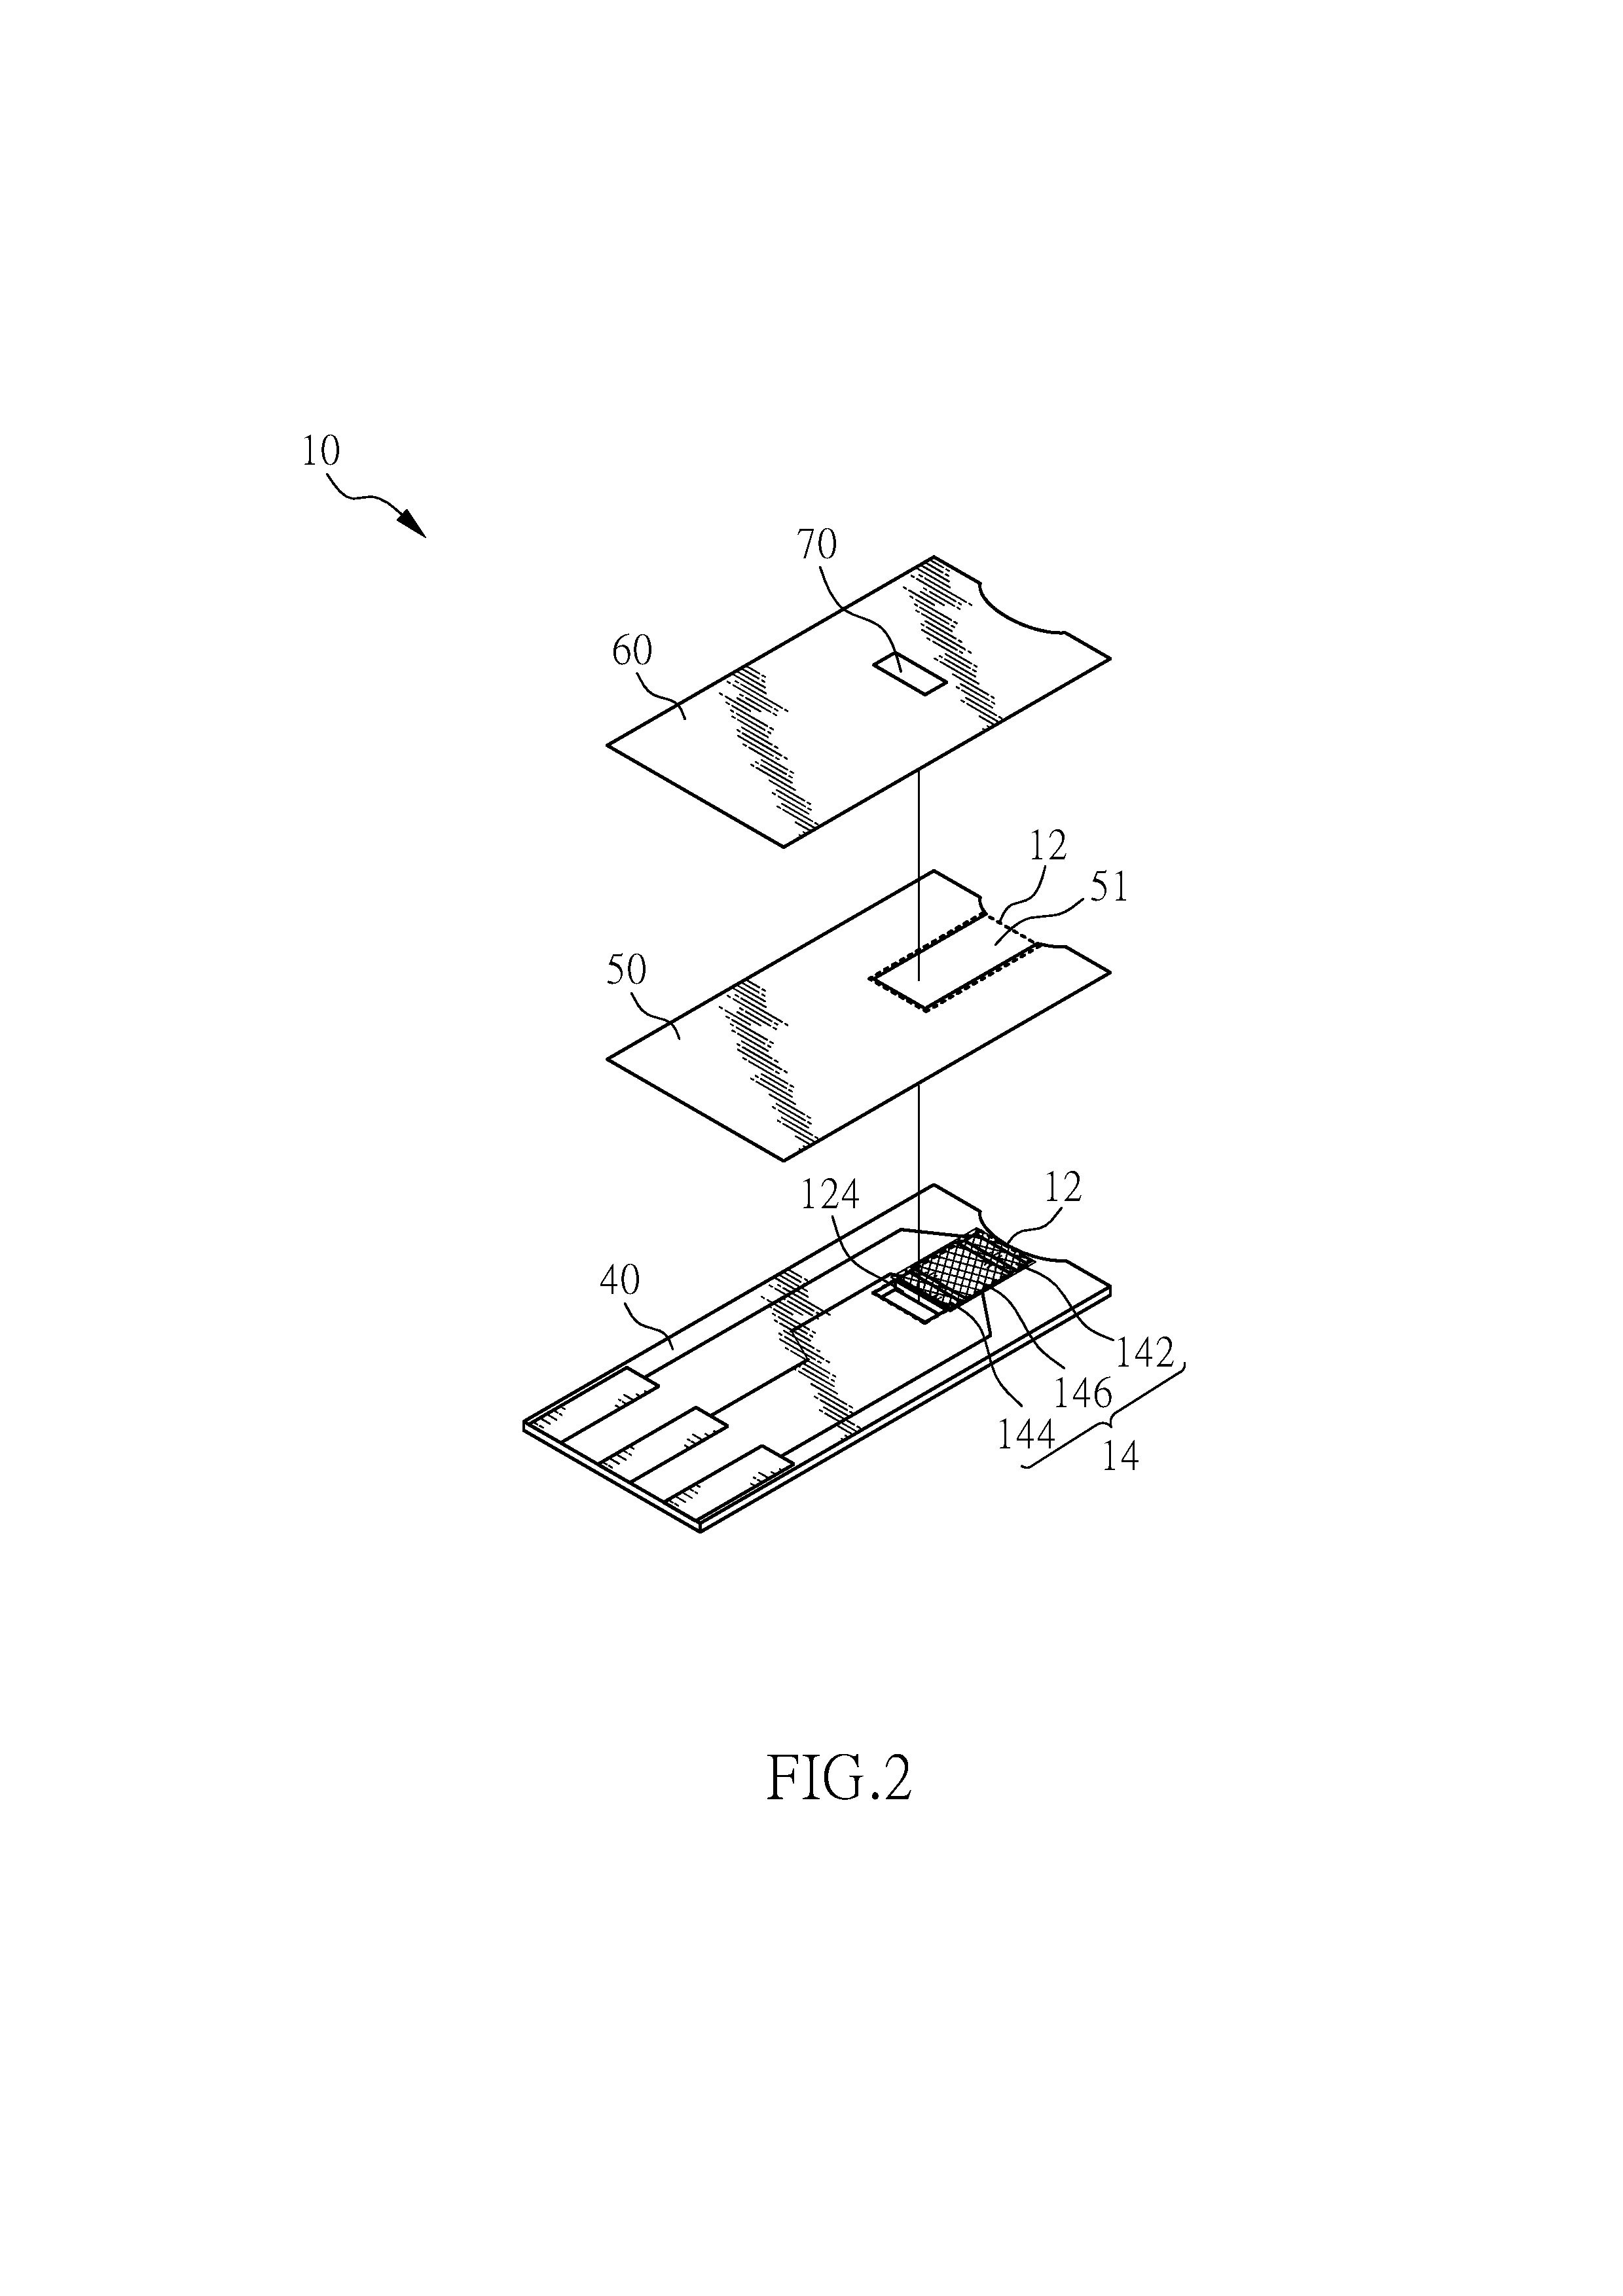 Test Strip and Detecting Device